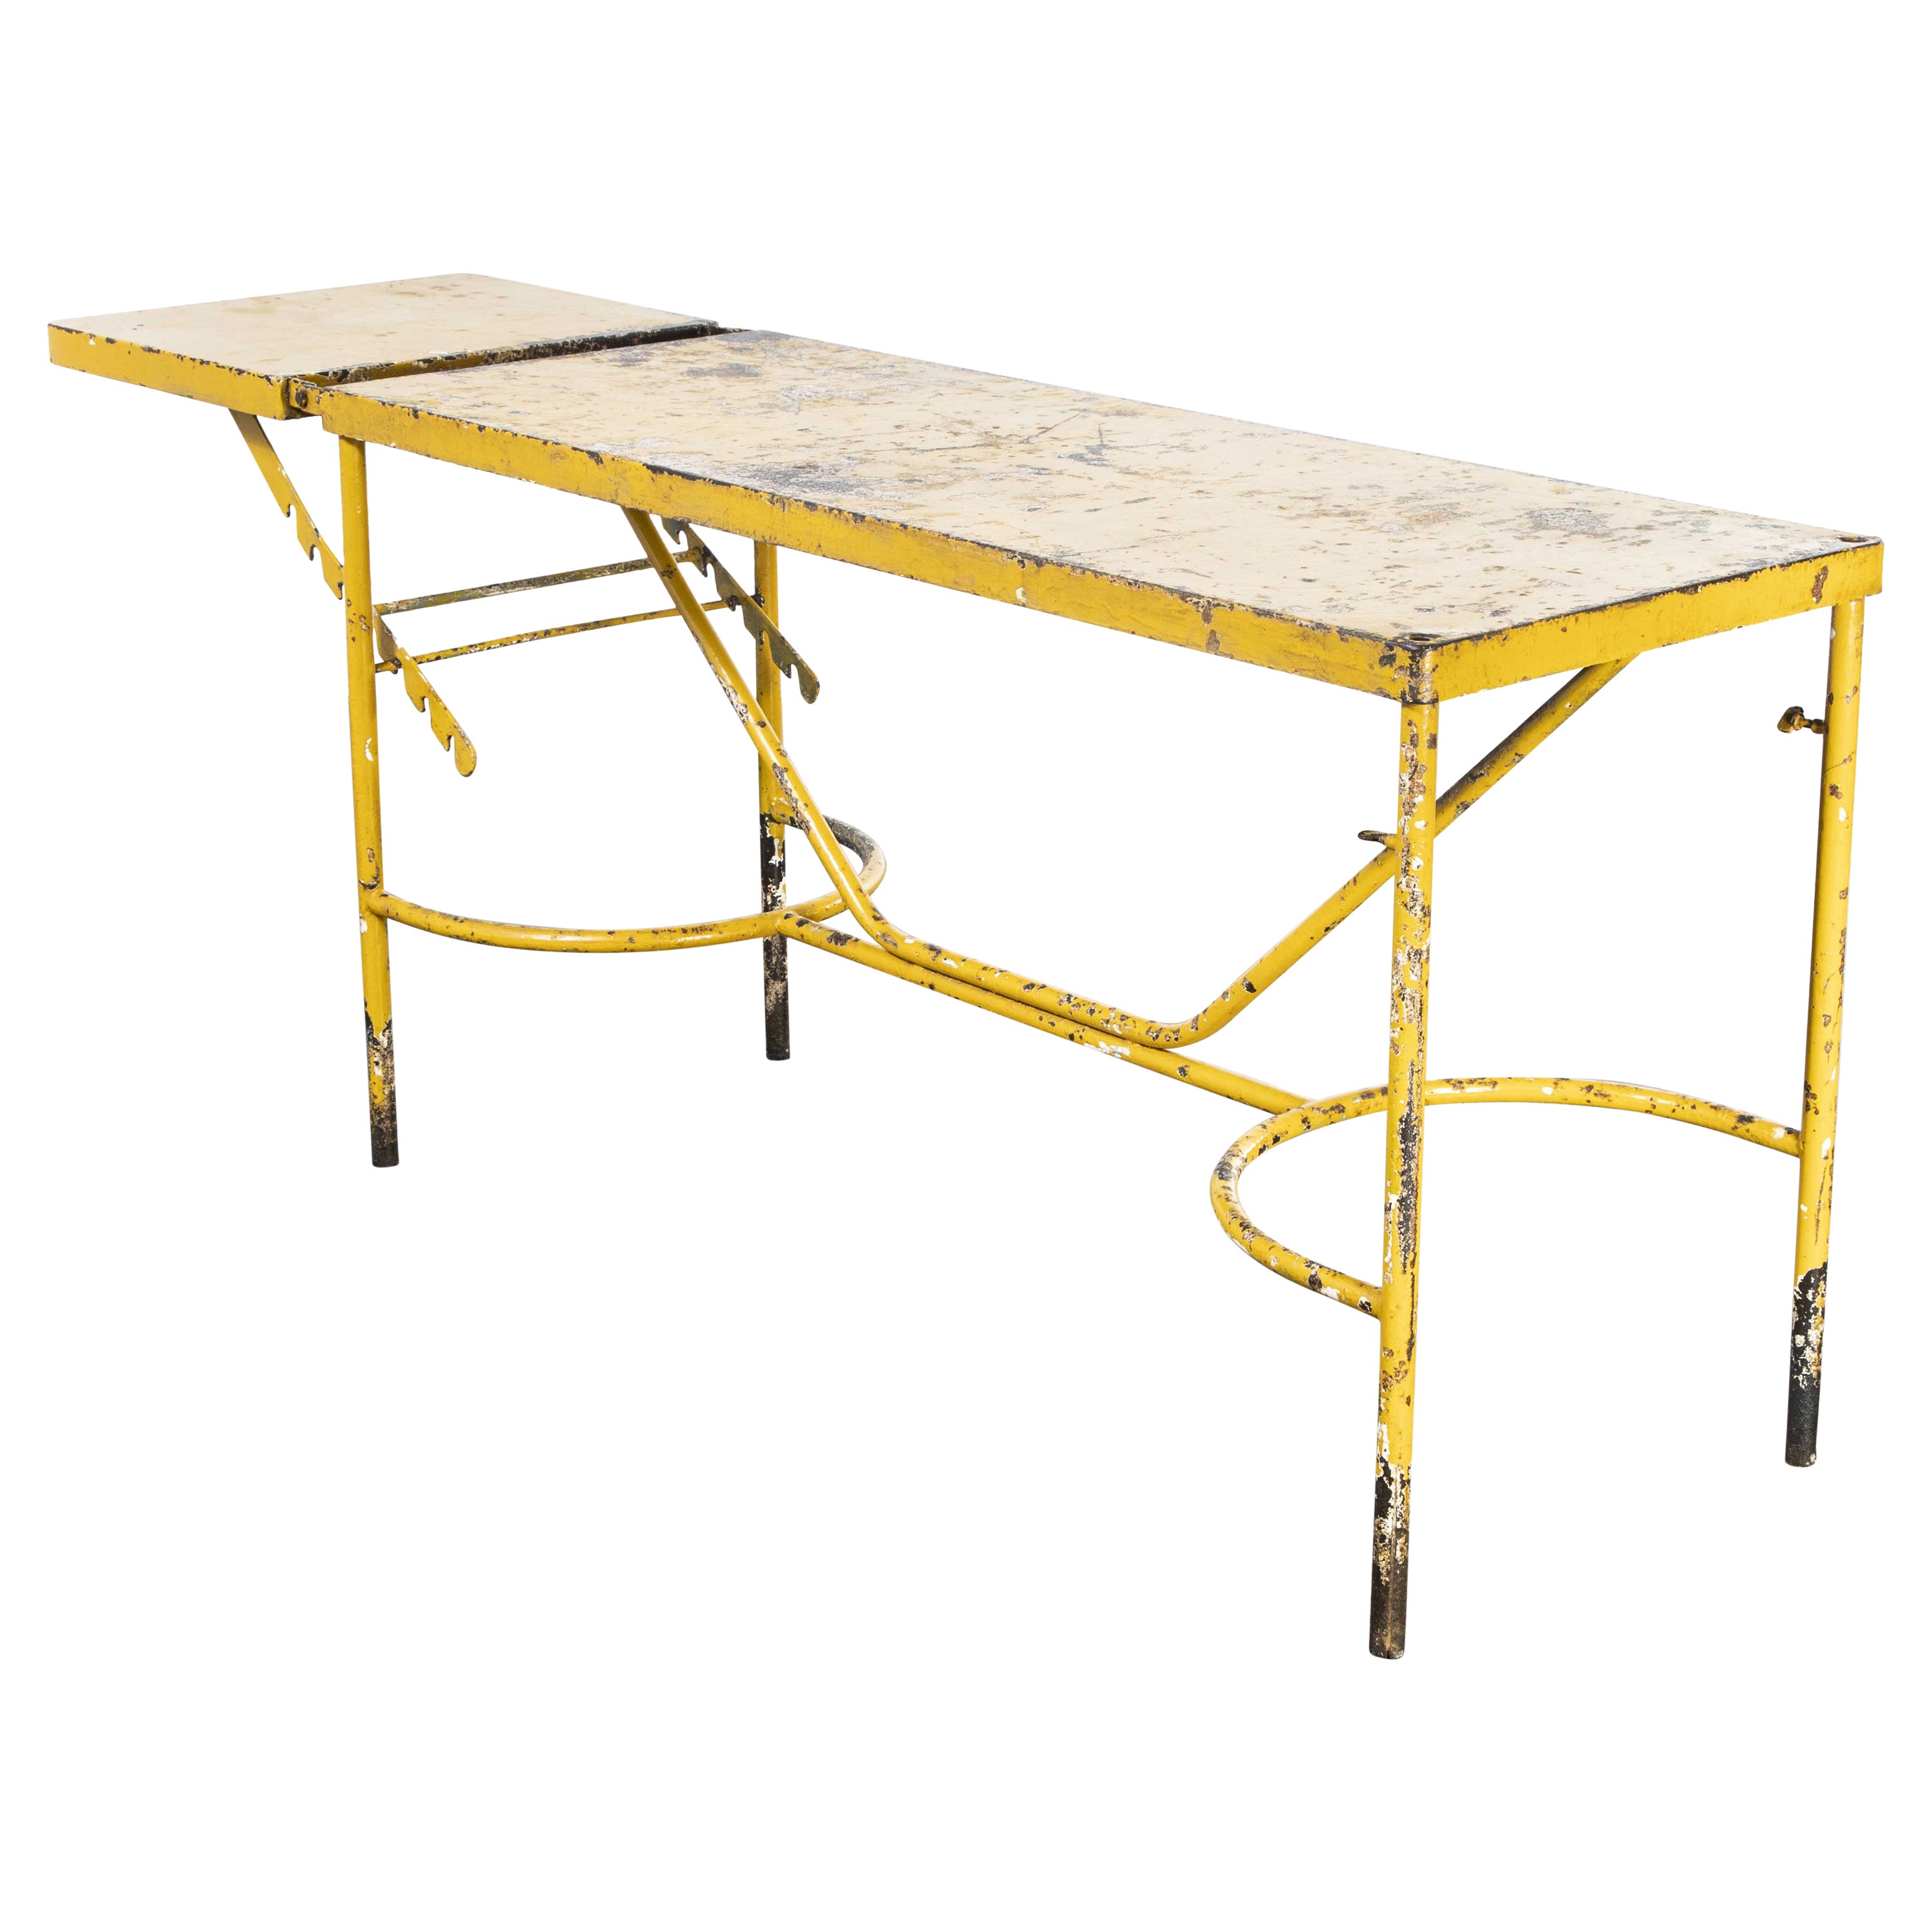 1960's French Army Industrial Field Table, Yellow